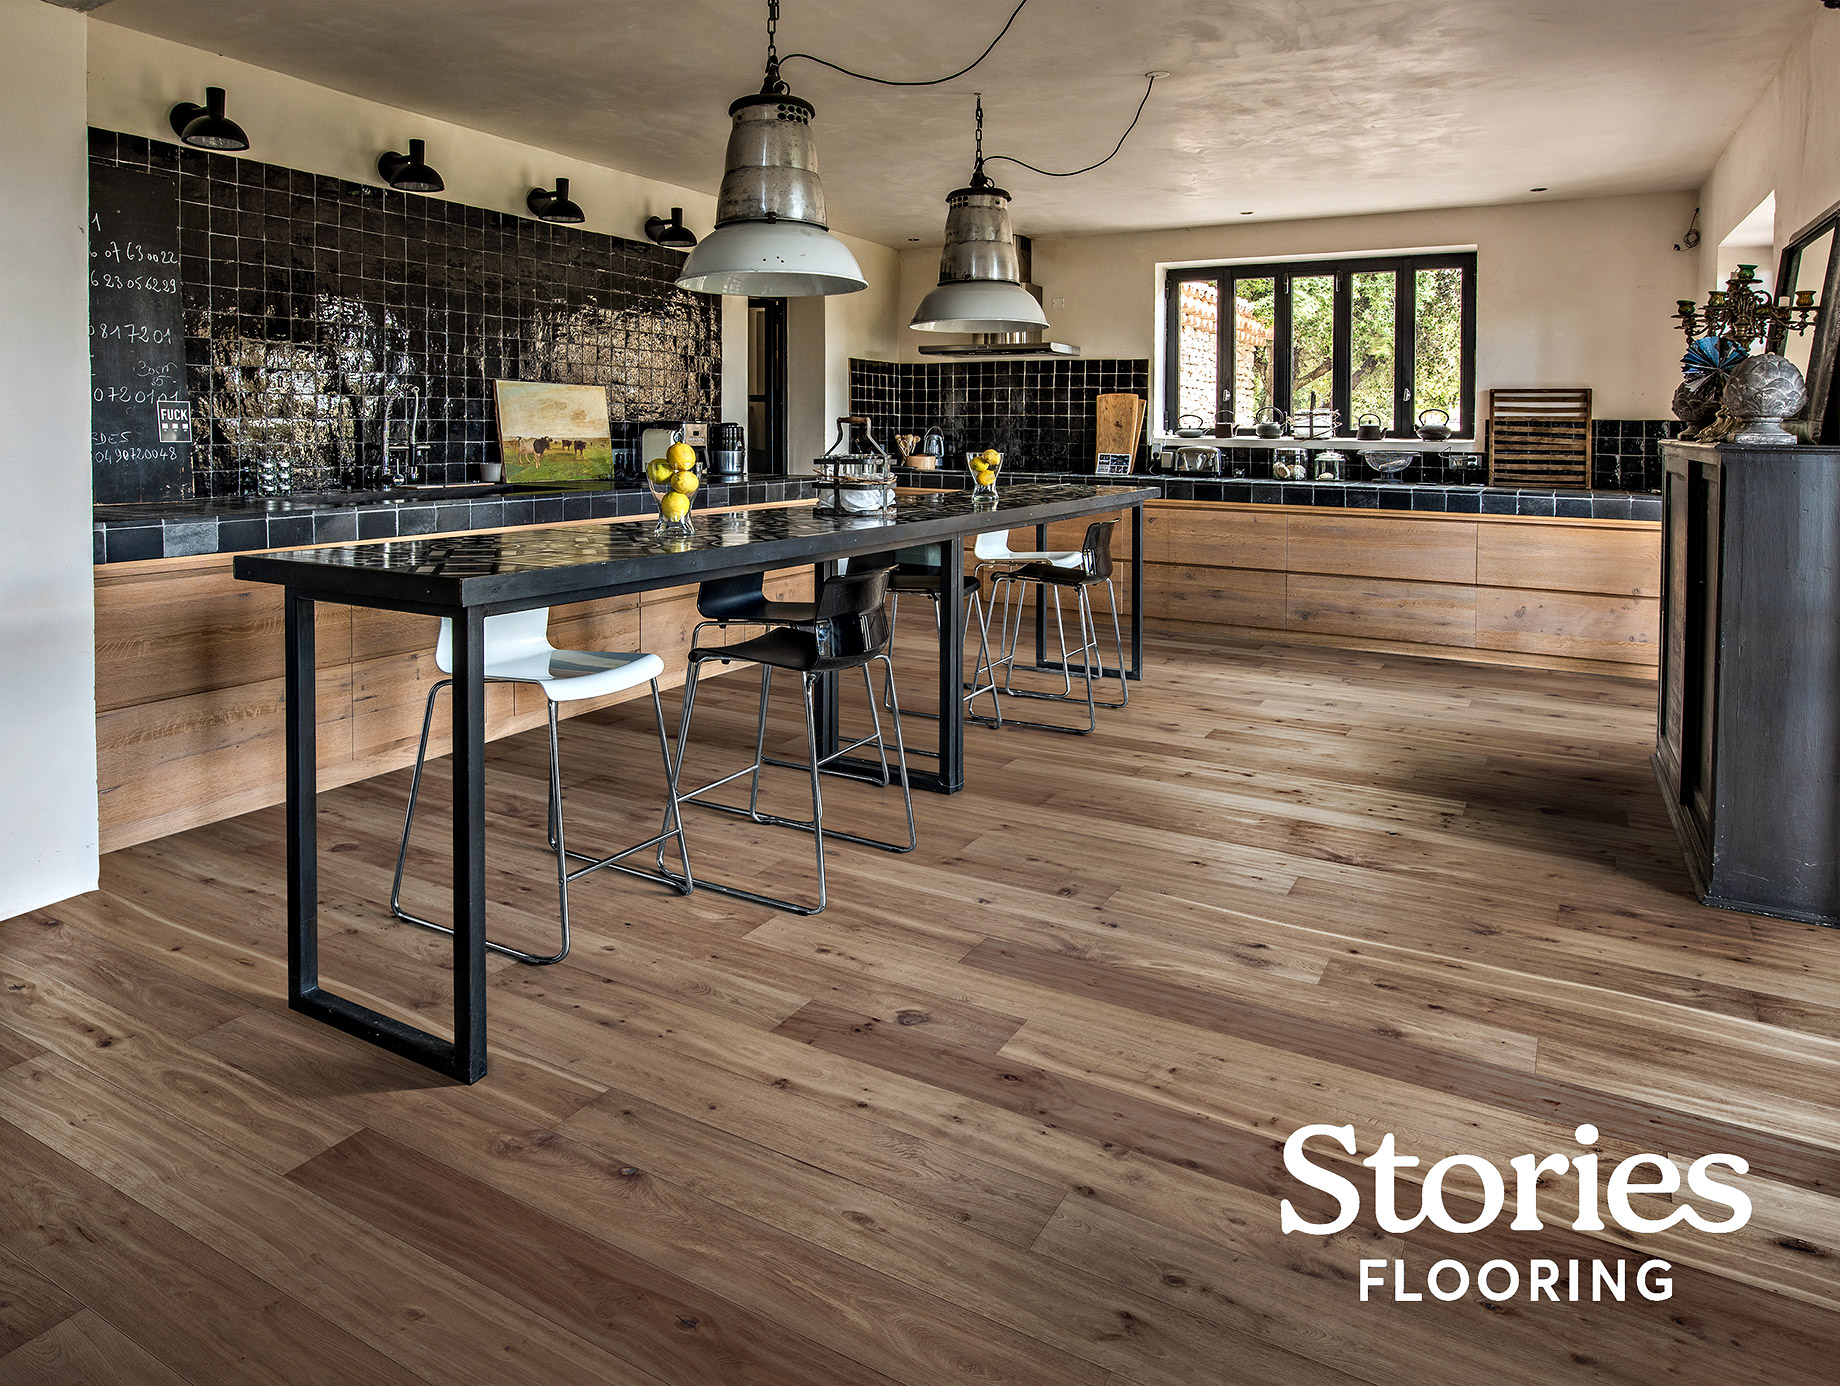 Stories Flooring - Kahrs Collection